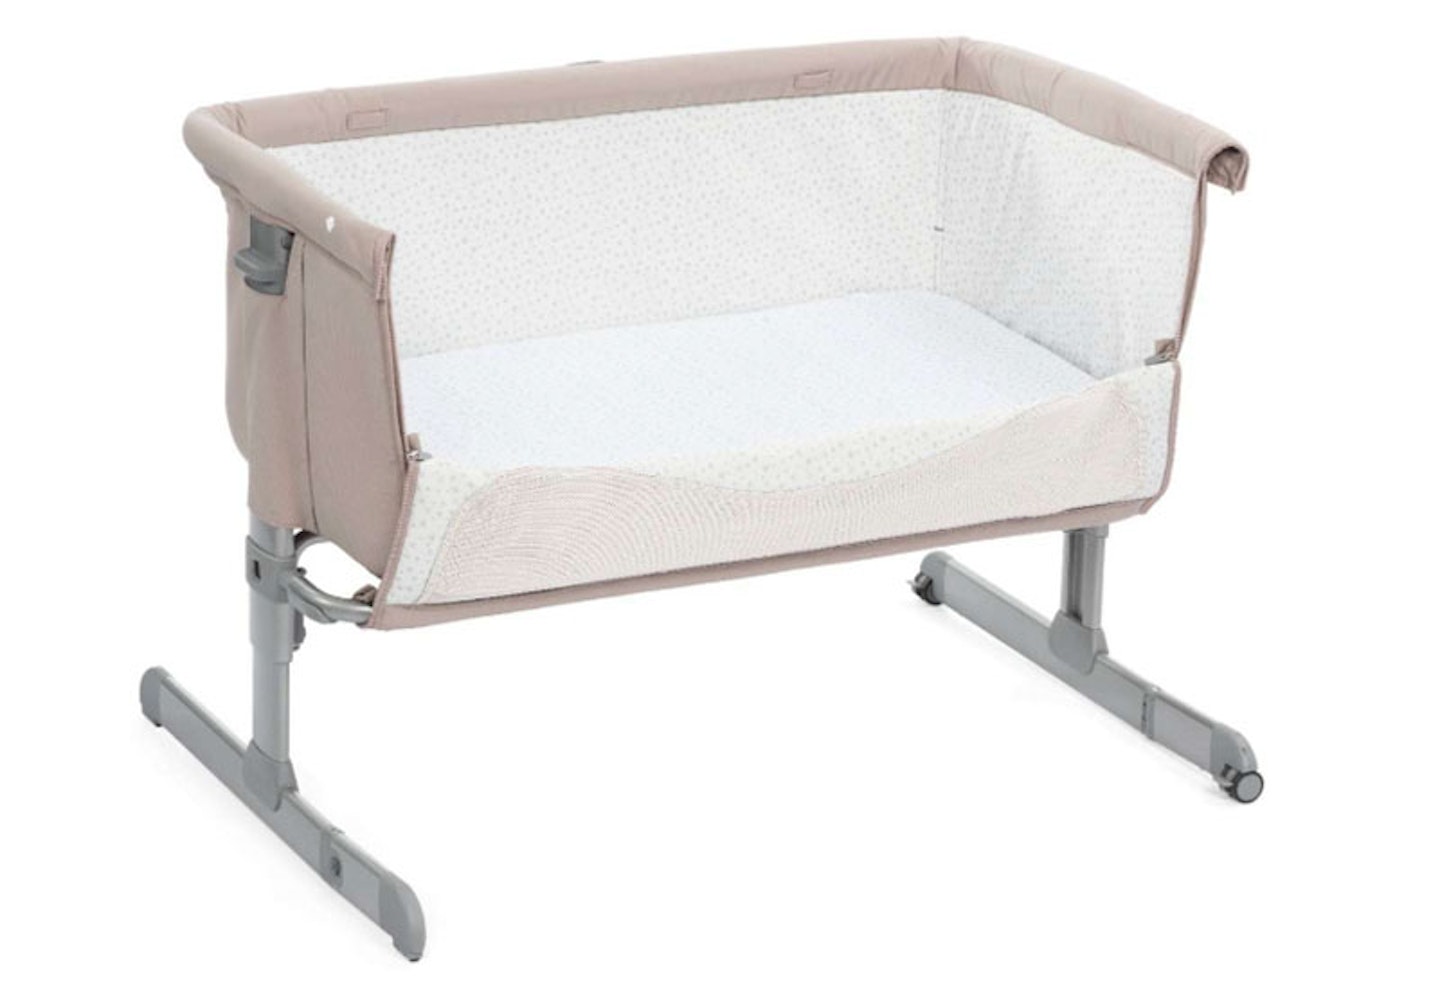 Chicco Next2Me Bedside Crib review